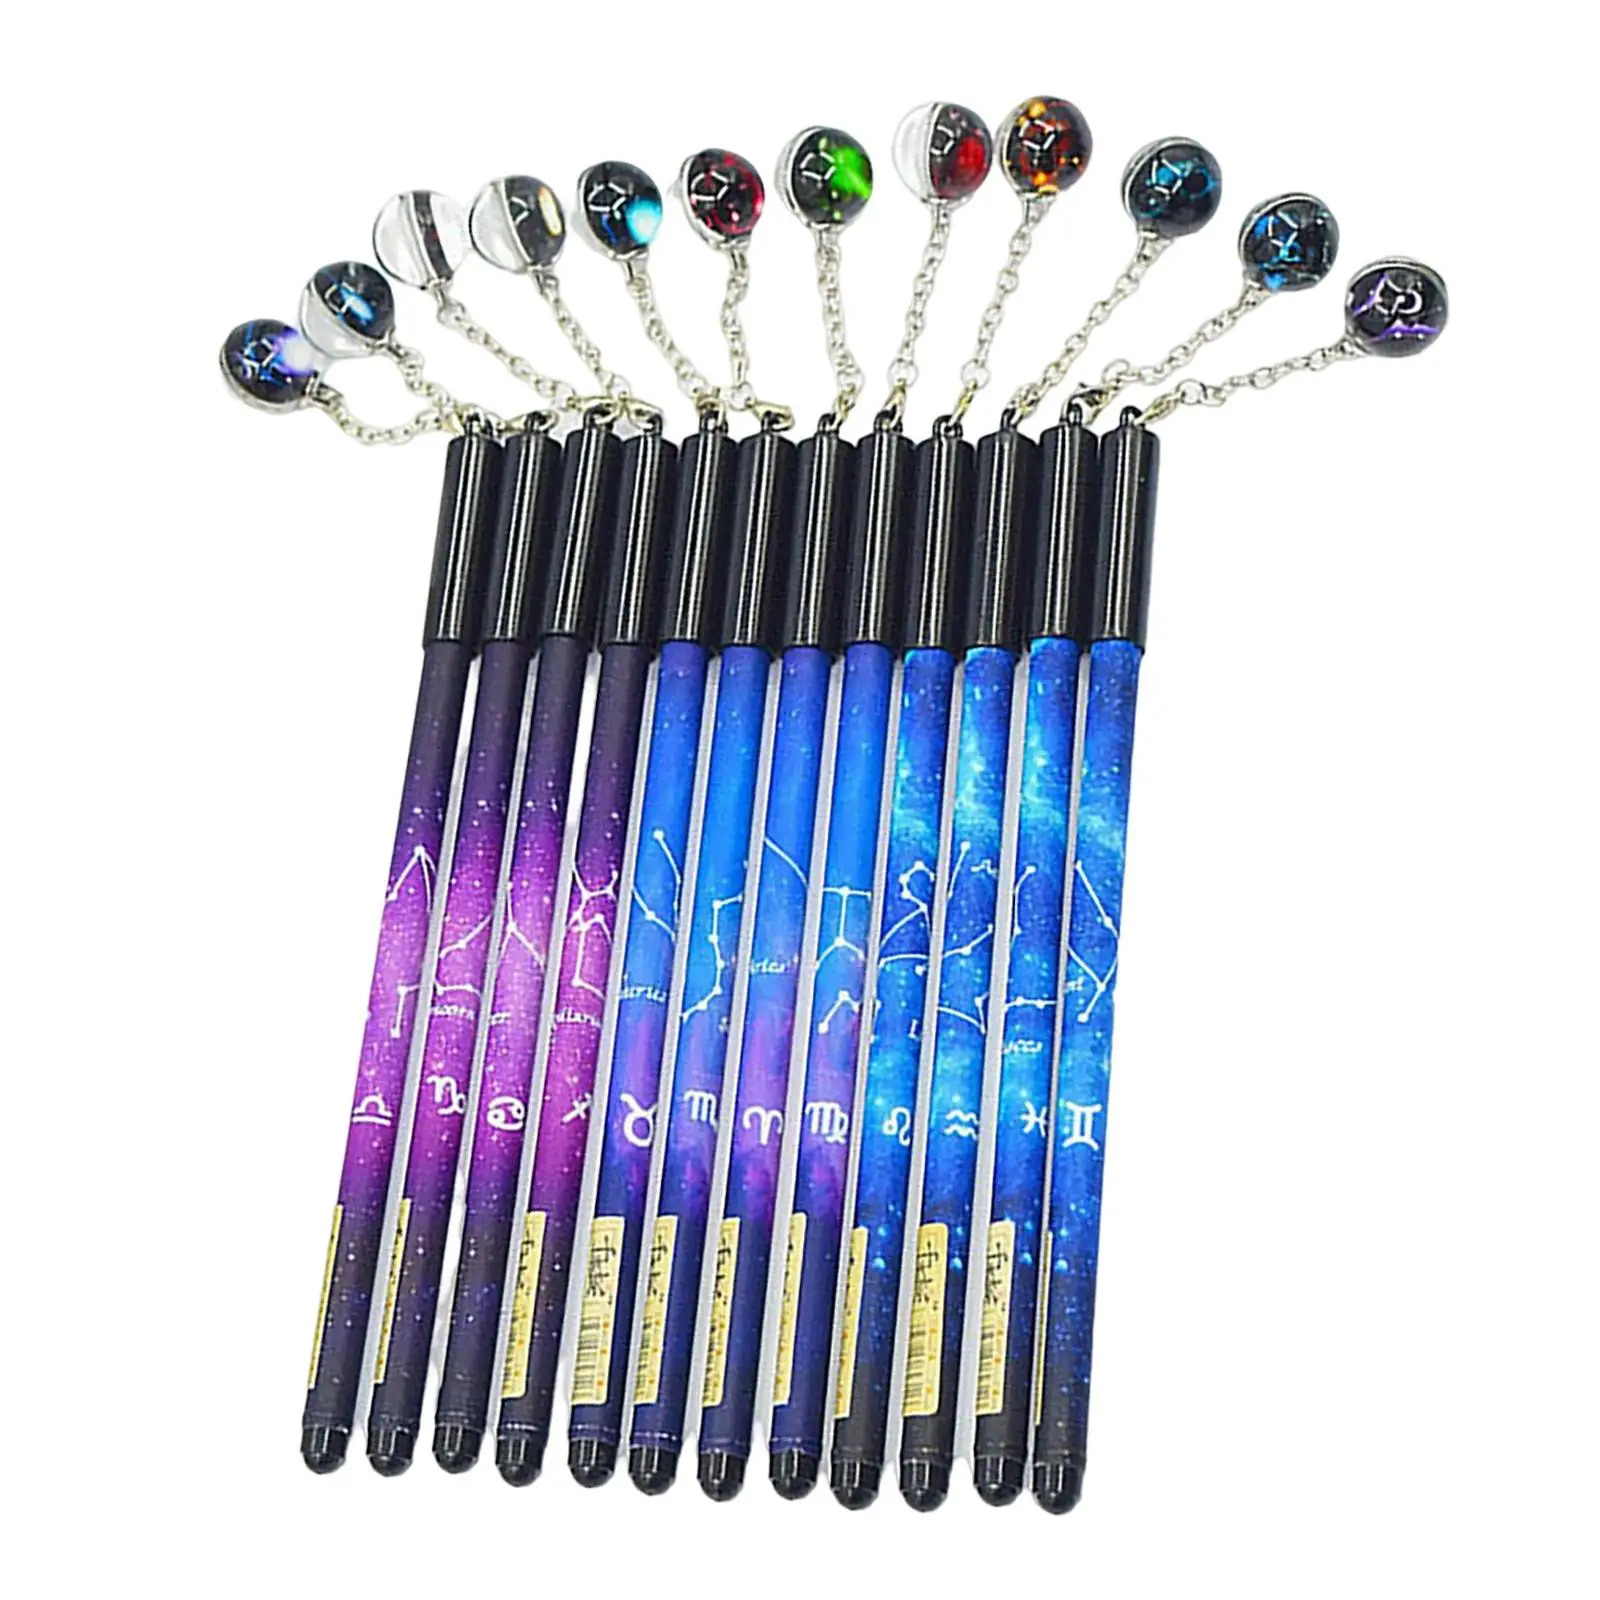 12 Pieces Constellation  Student  Drawing 0.5mm Writing Pendant Neutral Gel  for Stationery Office  Gift Supplies